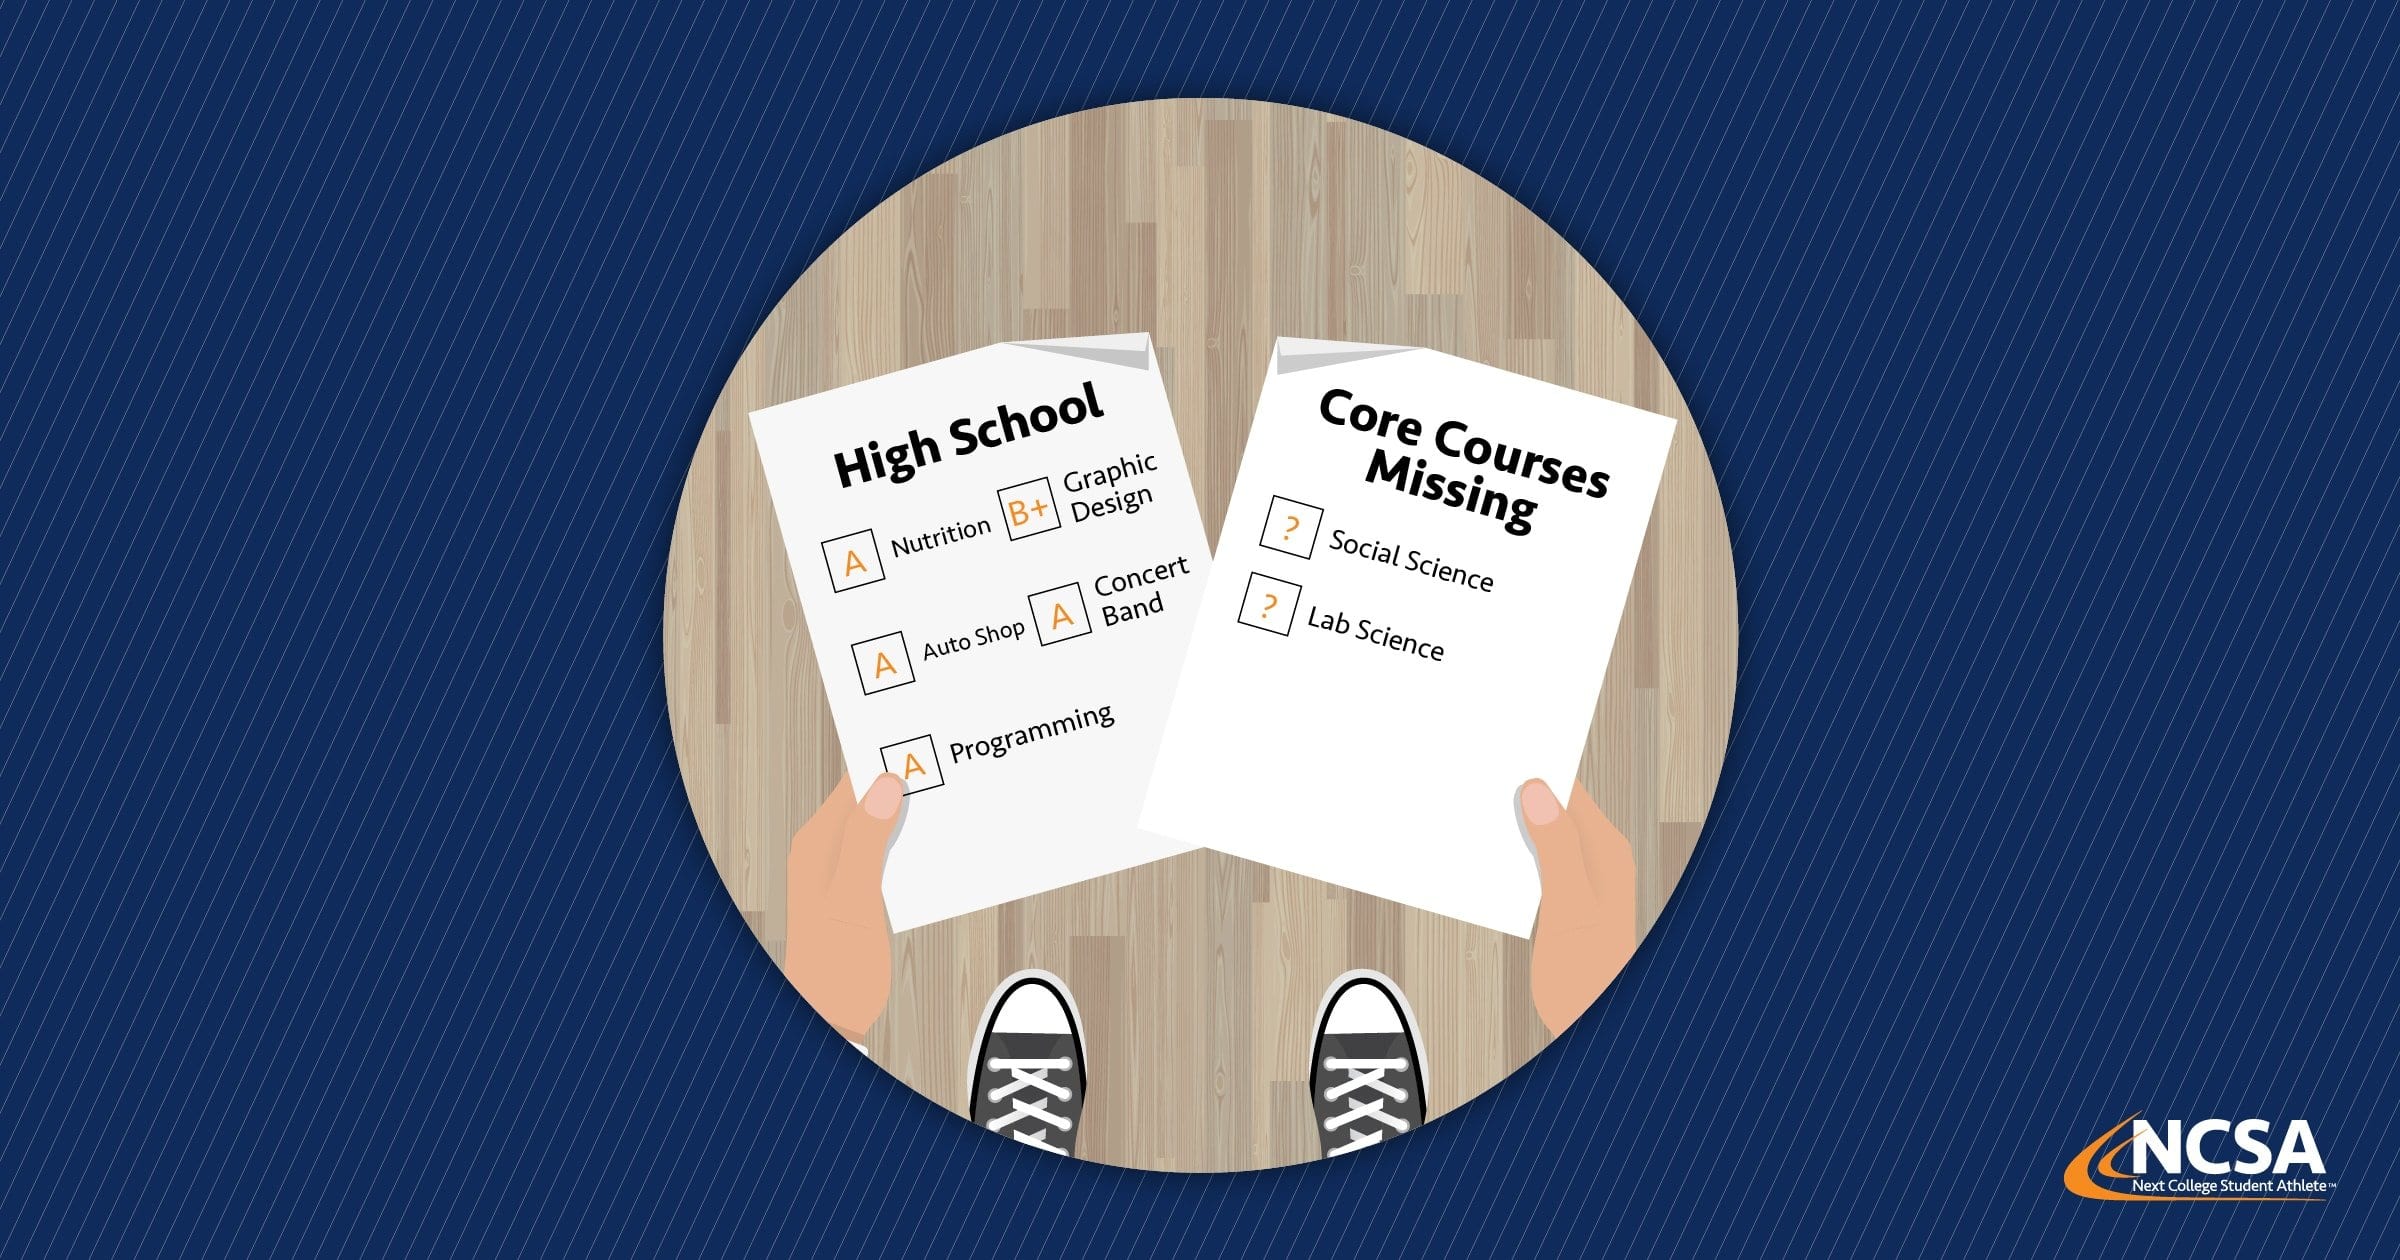 Ncaa Core Course List  Ncaa Approved Courses For Ncaa Core Course Worksheet